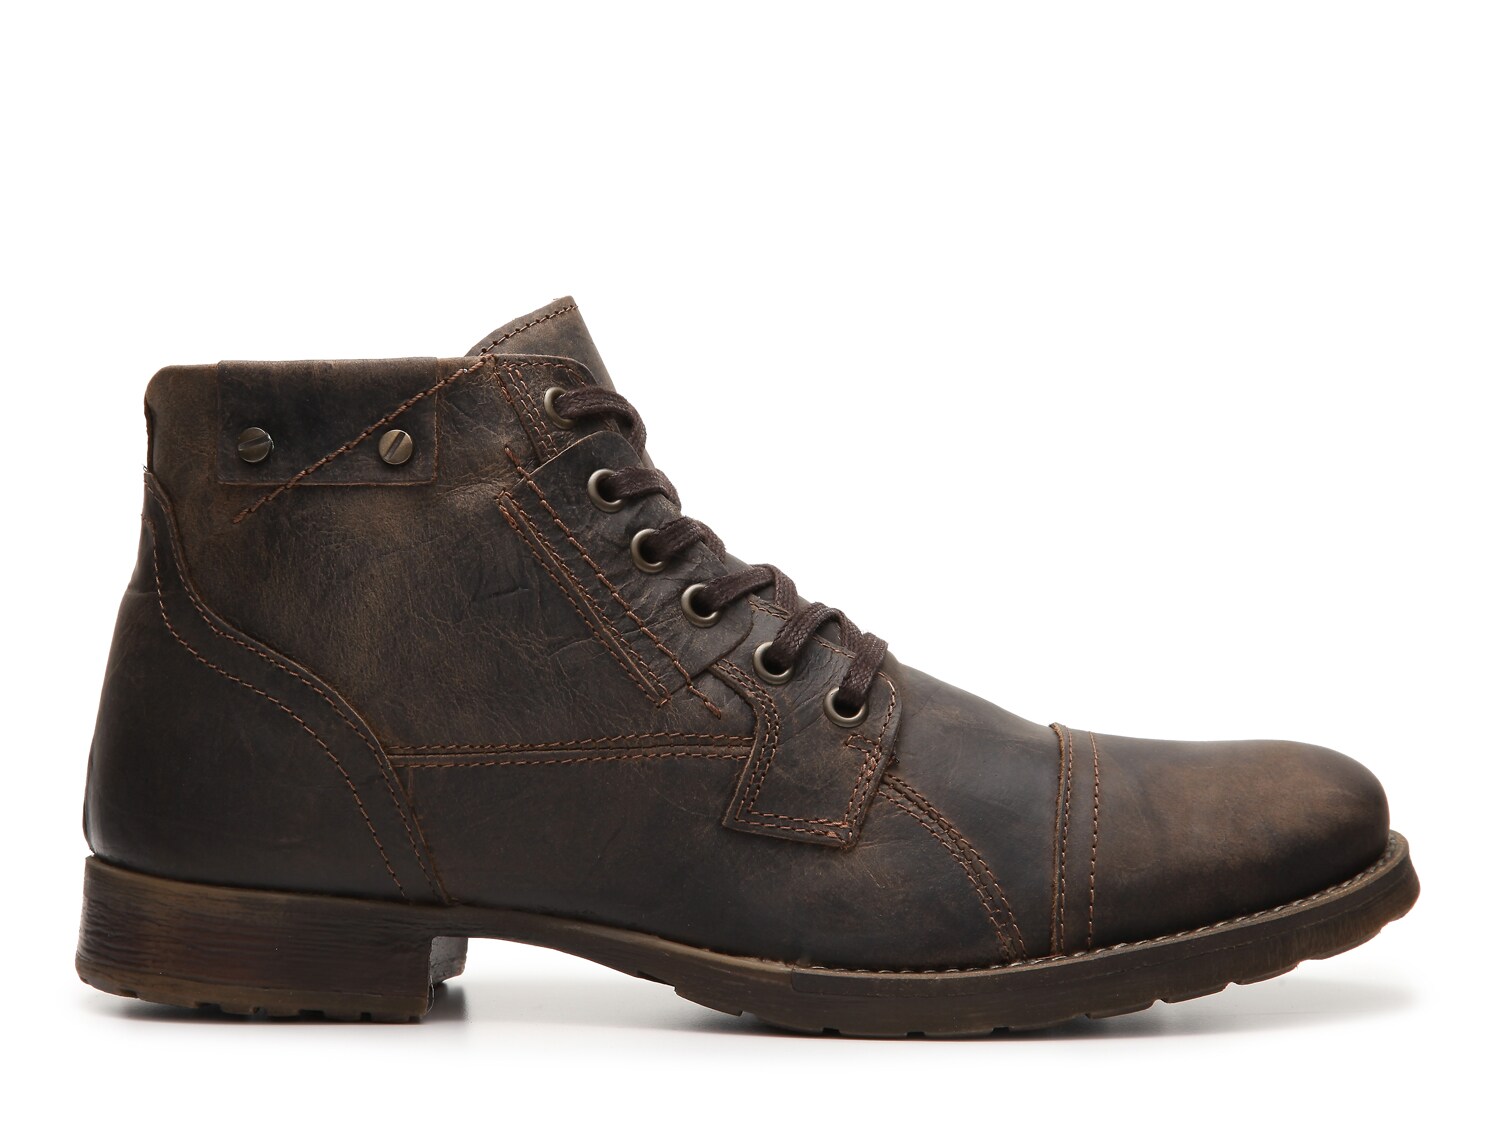 dsw casual boots